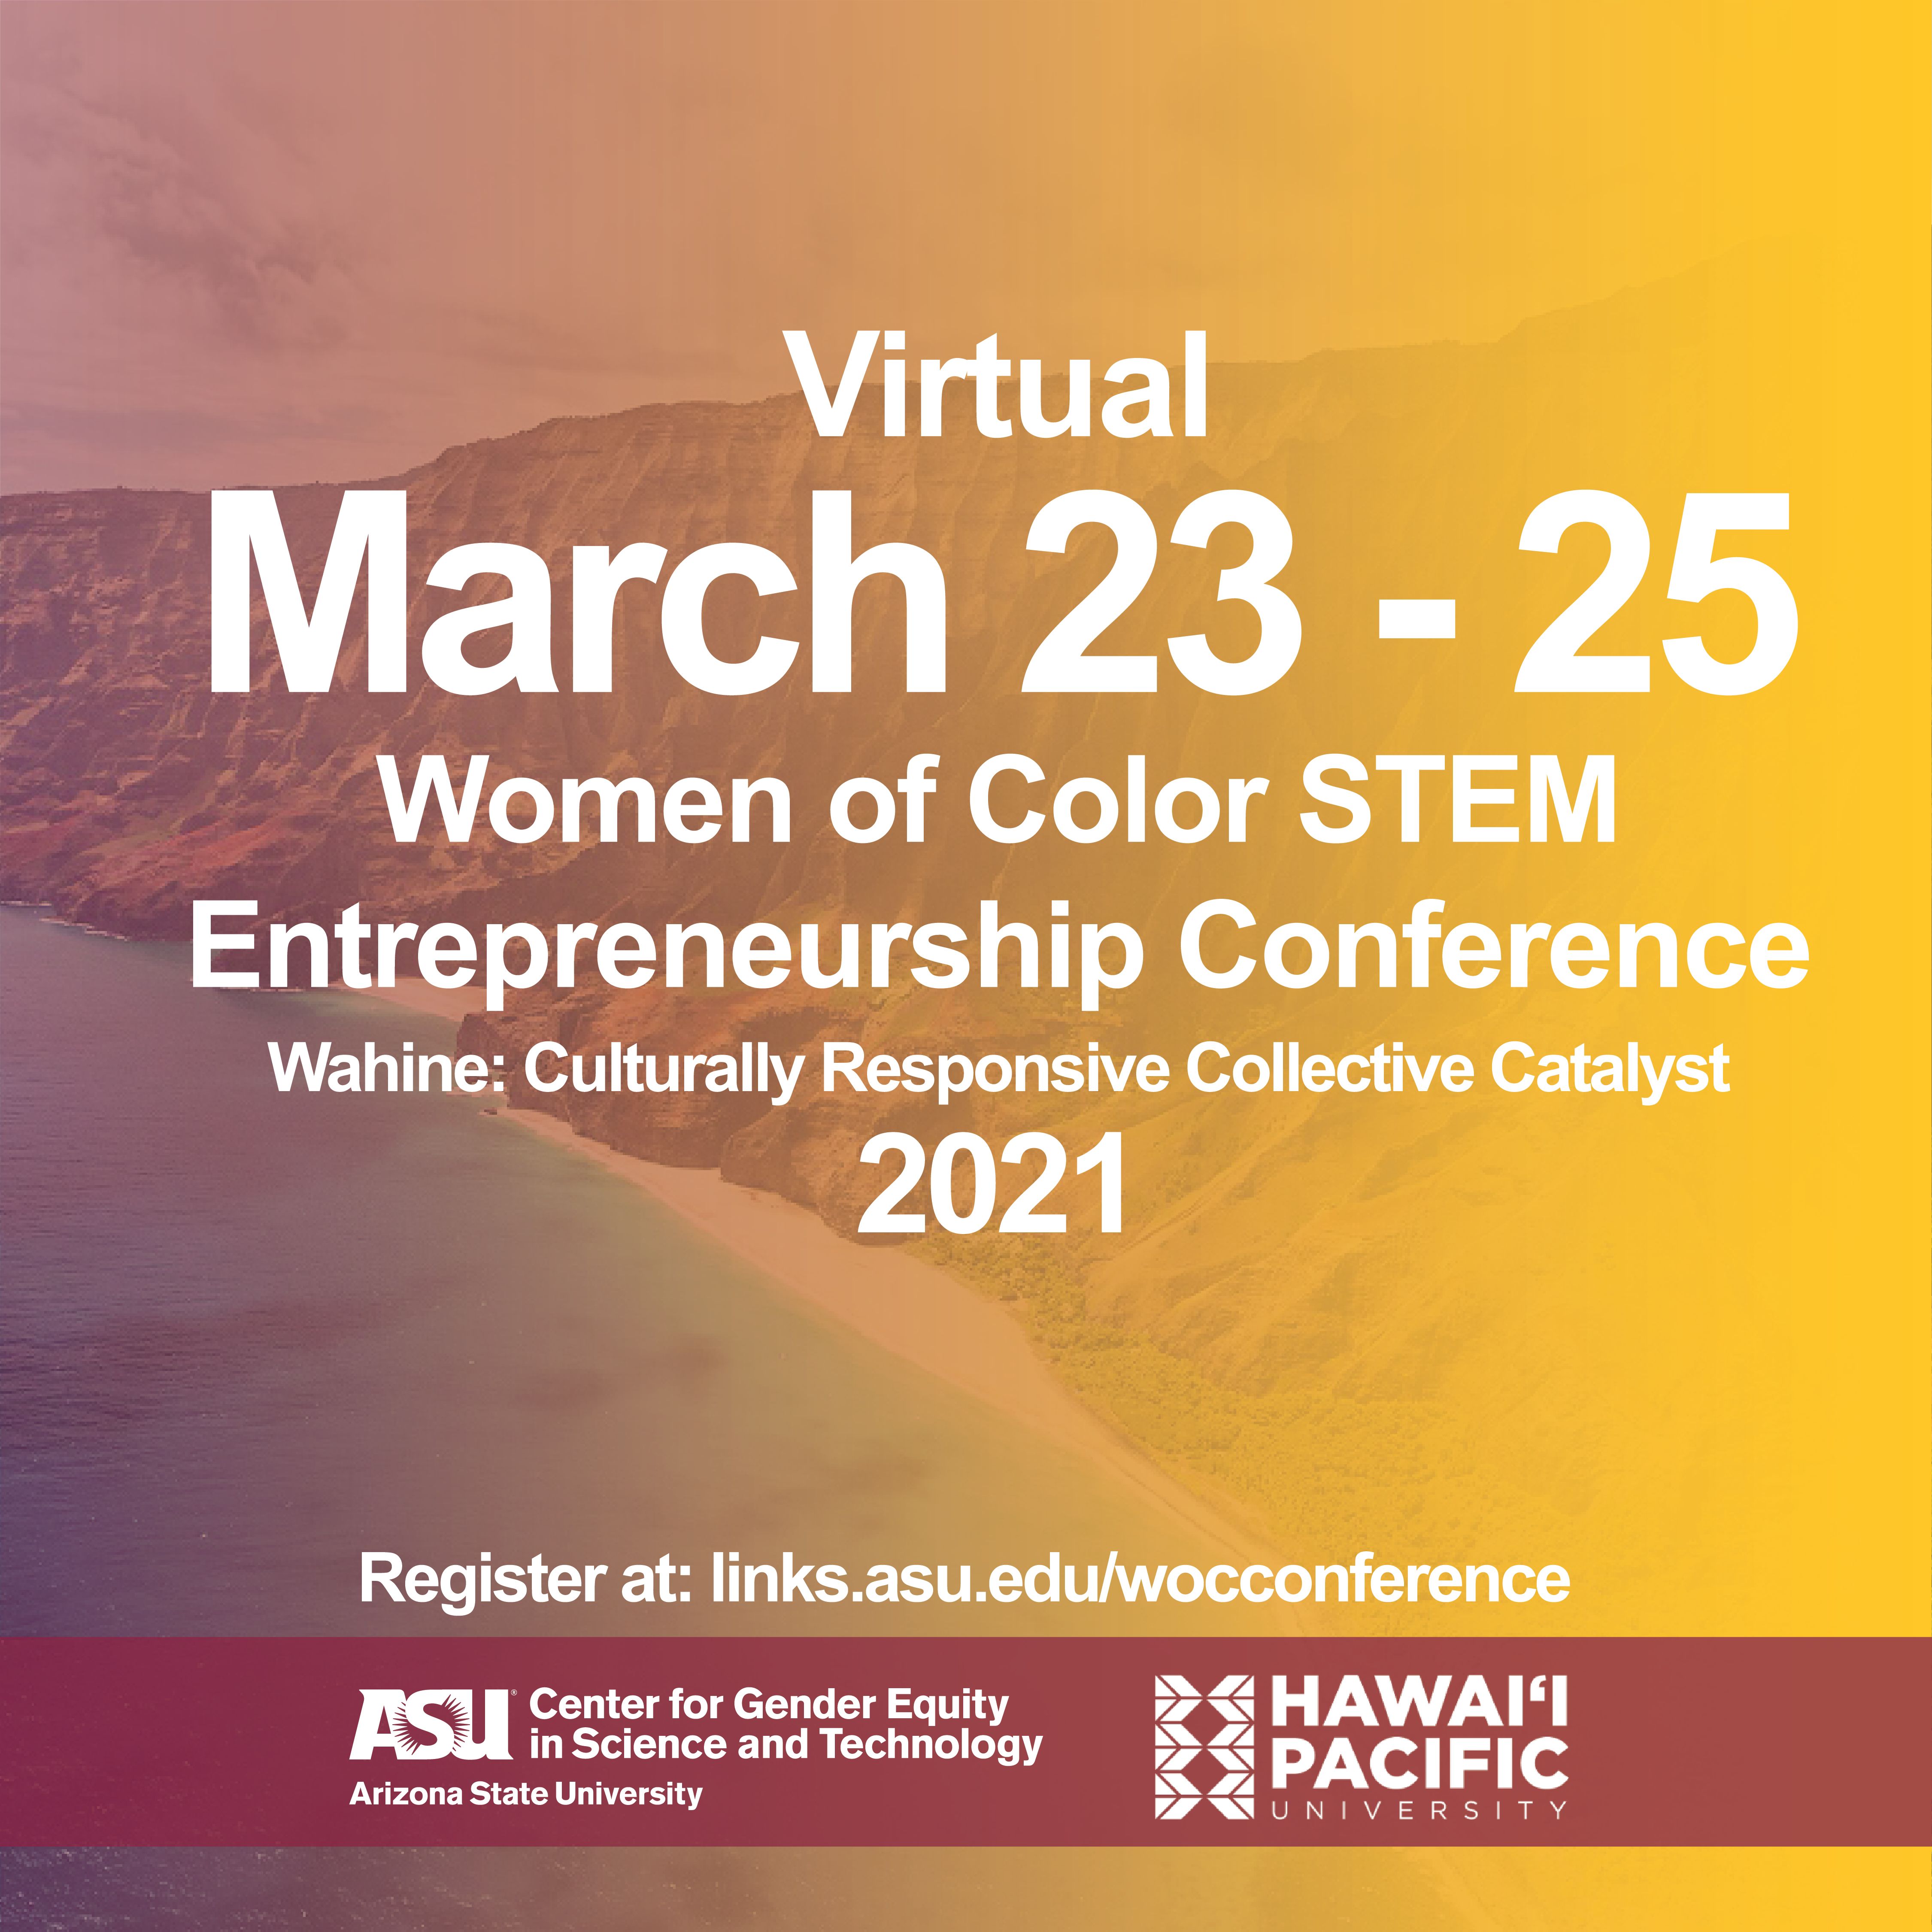 Mia Ong and Nuria Jaumot-Pascual of TERC along with Kathy DeerInWater of AISES will present at the Women of Color STEM Entrepreneurship Conference